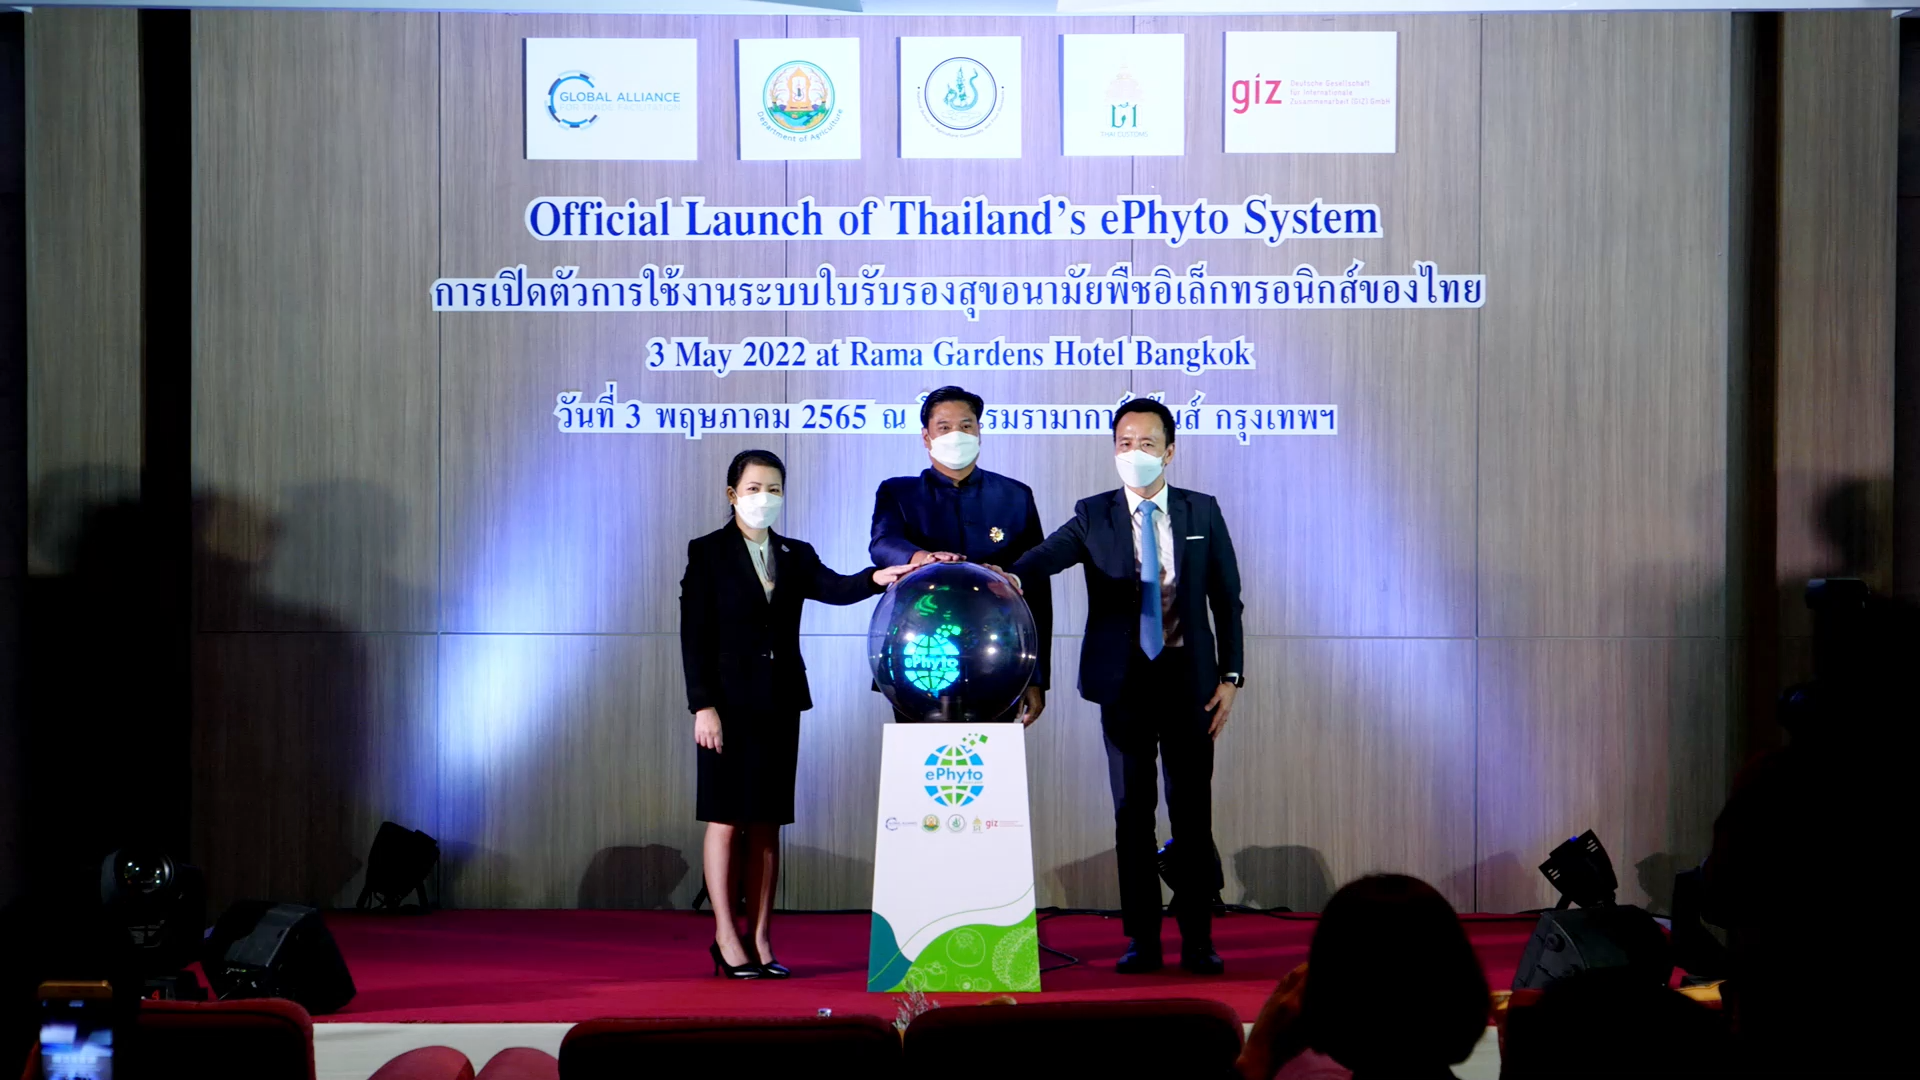 From left: Saowaluck Supakamonsenee, Deputy Secretary-General, National Bureau of Agricultural Commodity and Food Standards, Rapibhat Chandarasrivongs, Director General, Department of Agriculture, and Phantong Loykulnanta, Deputy Director-General, Thai Customs Department, at the launch ceremony